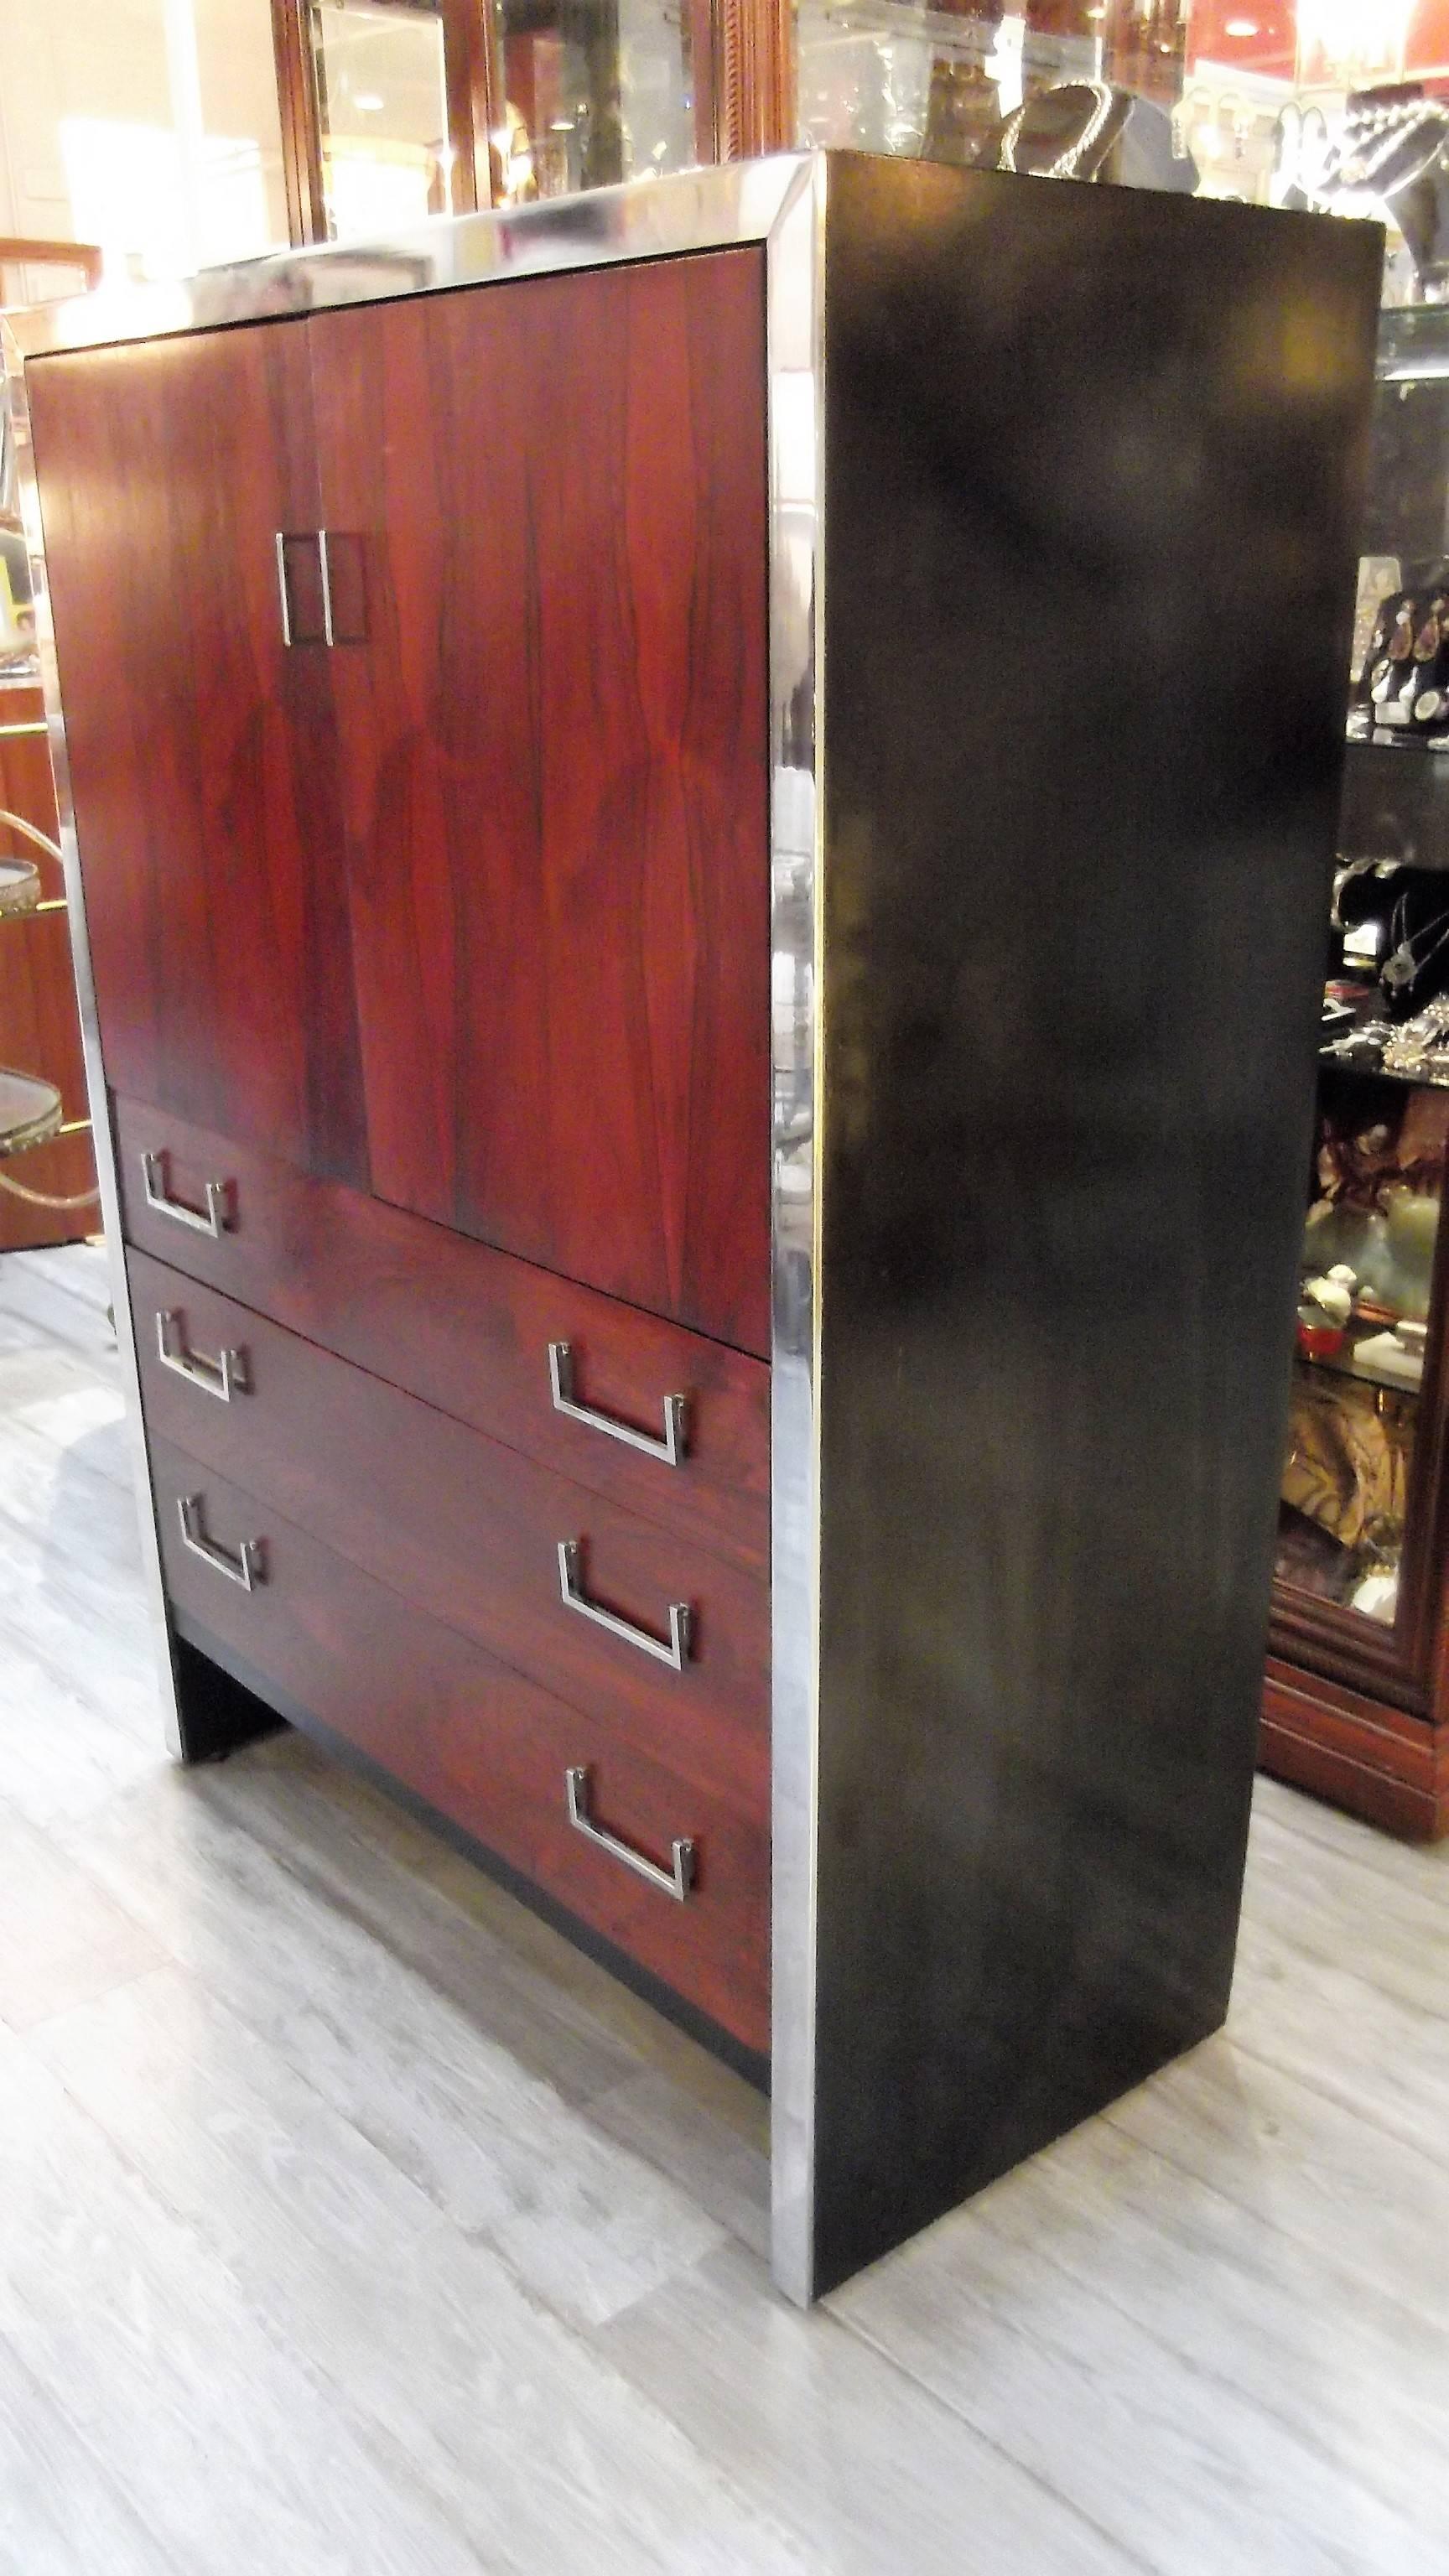 Rich rosewood grain complimented by polished chrome trim and hardware. Designed by Milo Baughman for W J Sloane with black lacquer sides, drawer and cabinet storage, sleek Mid-Century design.